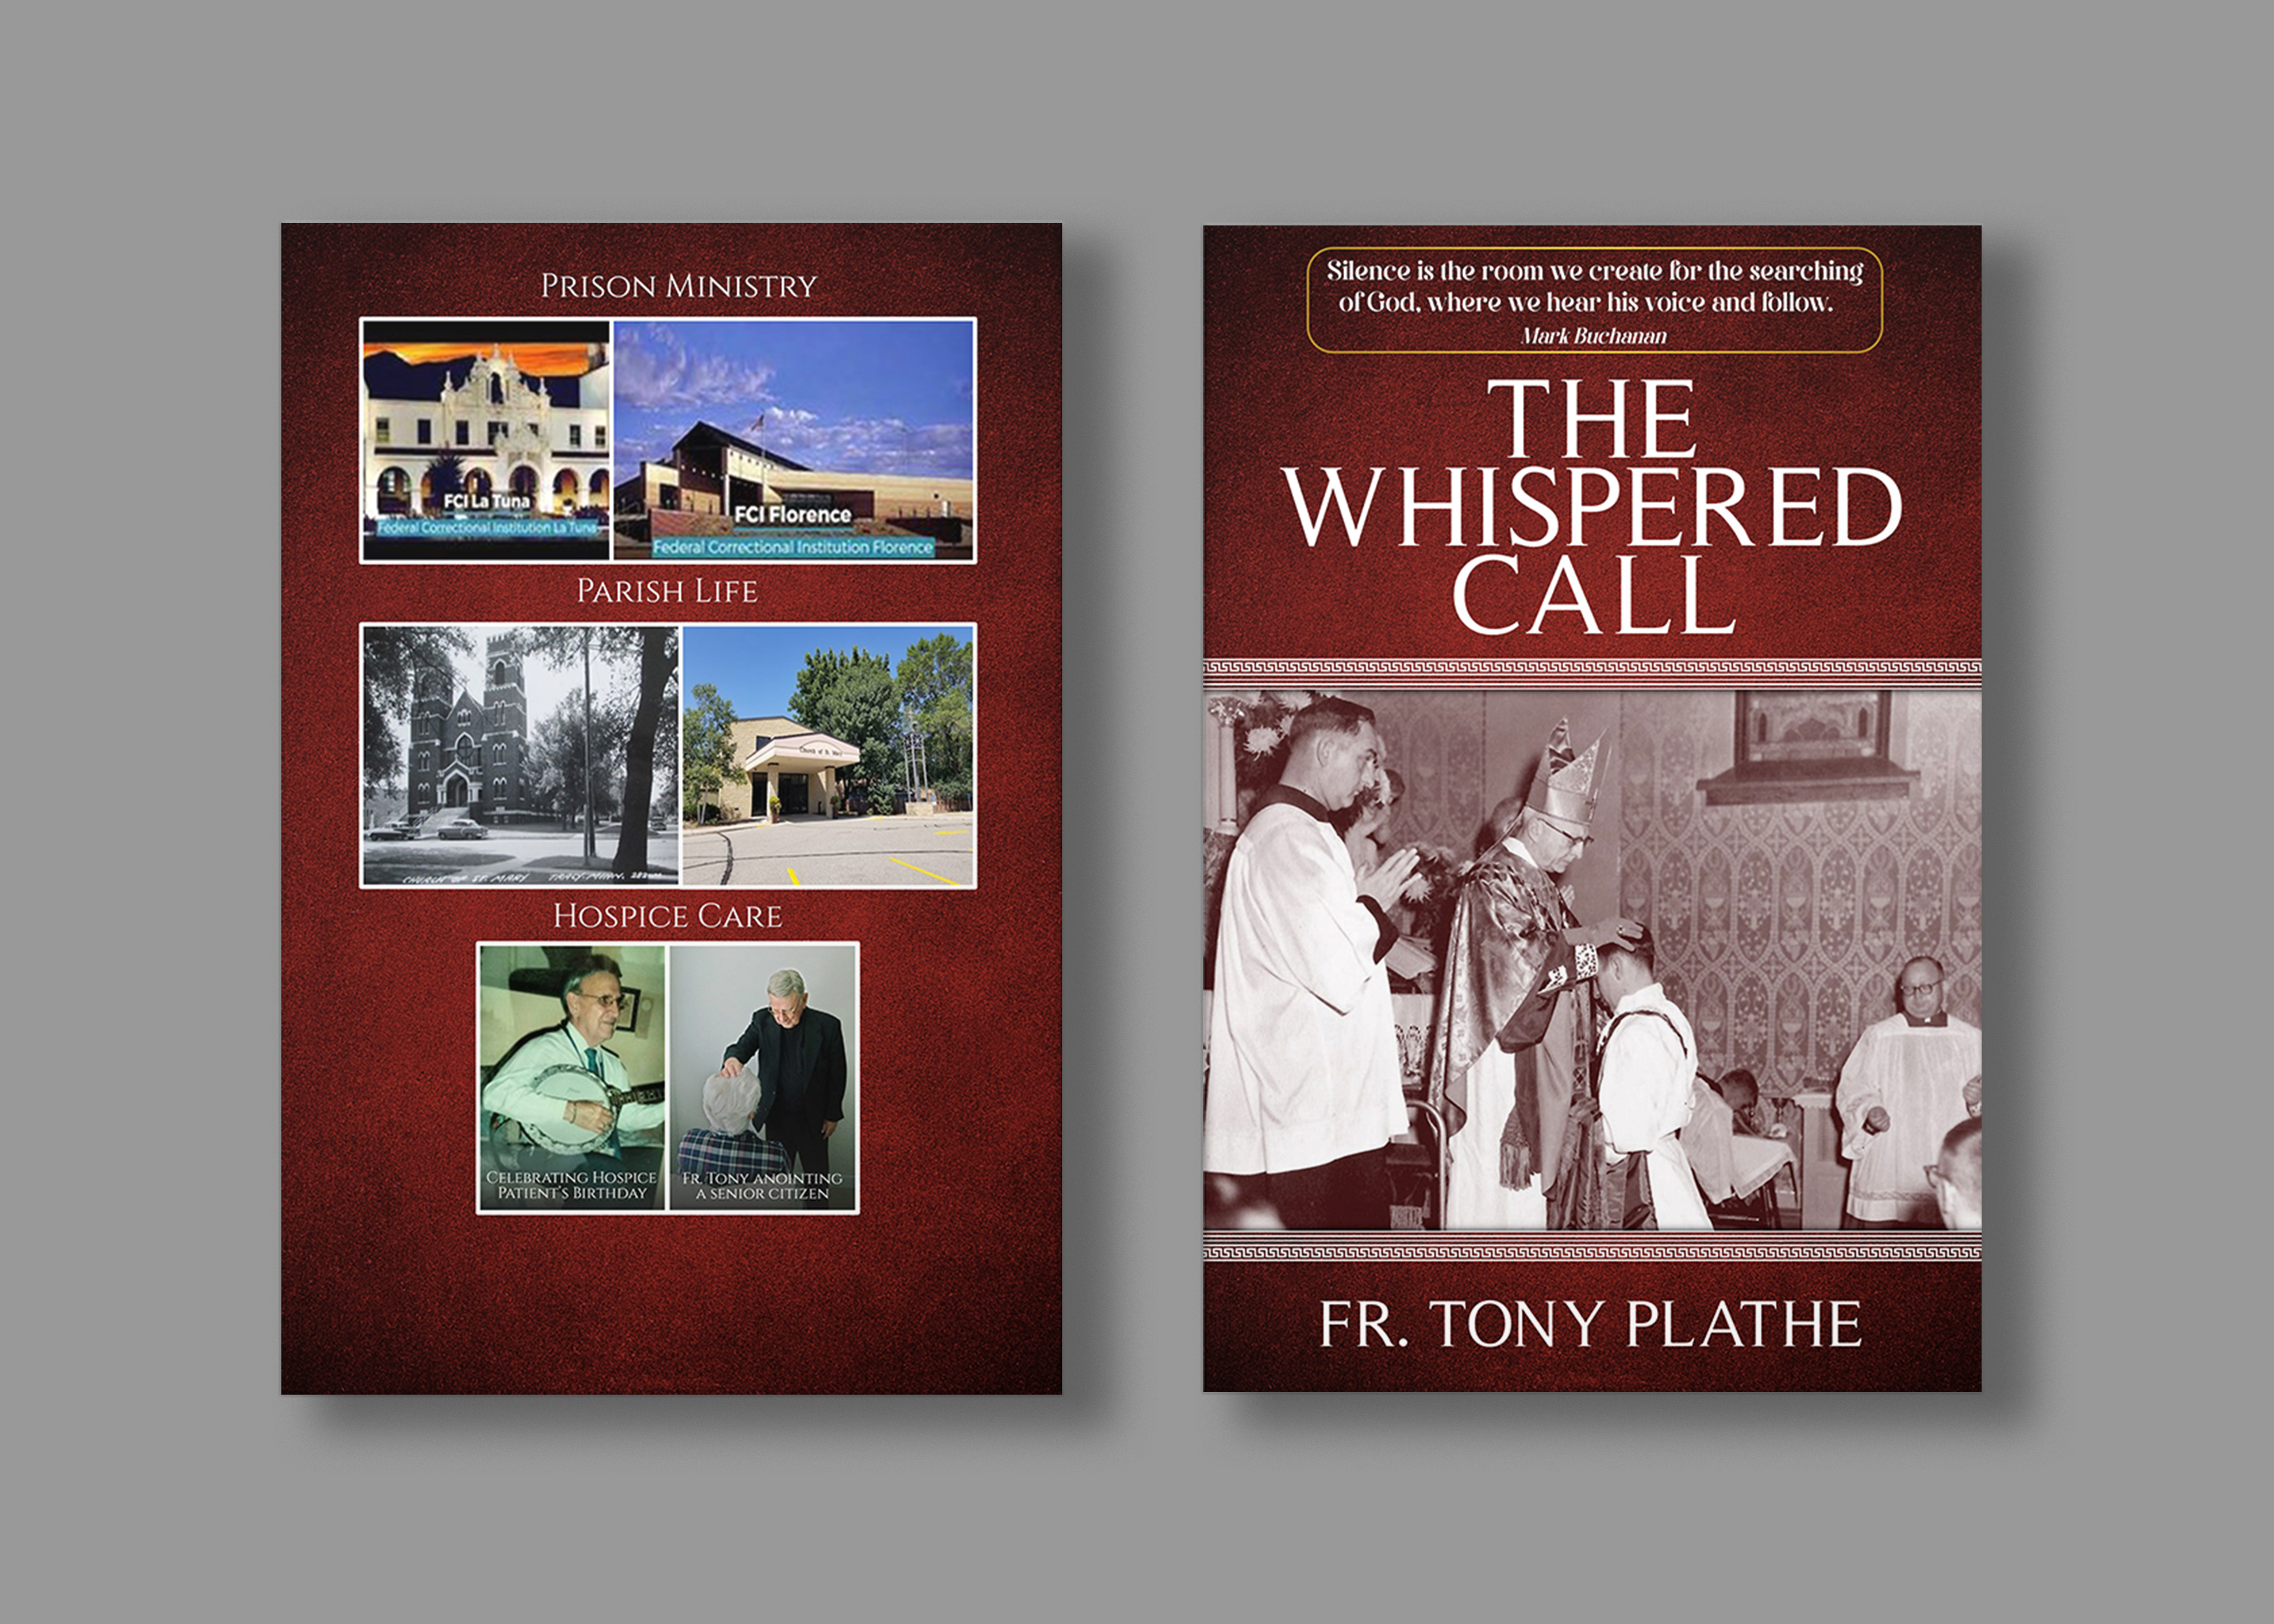 Discover the Inspirational Journey of a Lifetime in "The Whispered Call" by Fr. Tony Plathe